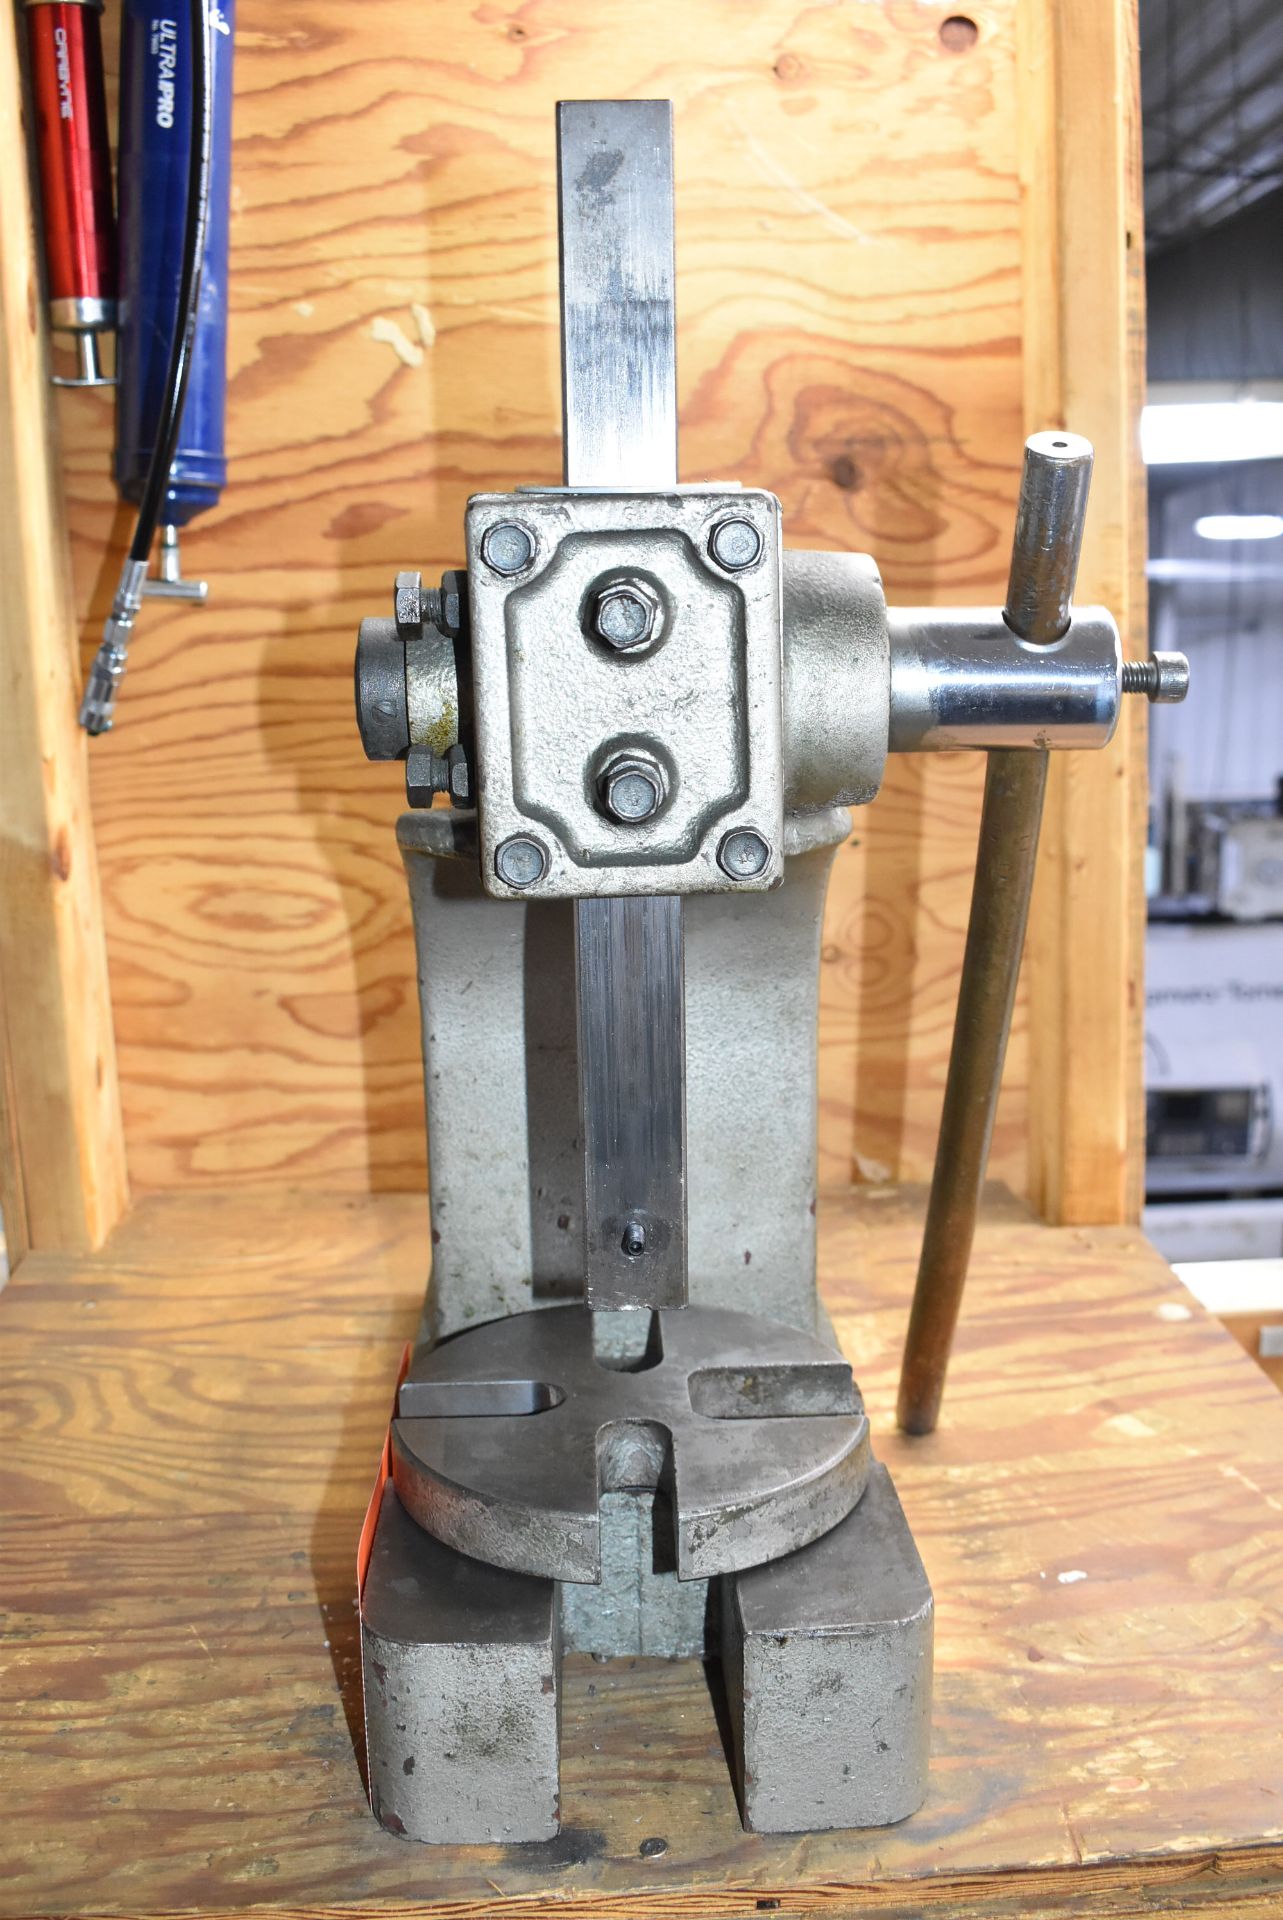 MFG UNKNOWN ARBOR PRESS WITH 8" THROAT, S/N N/A - Image 2 of 3